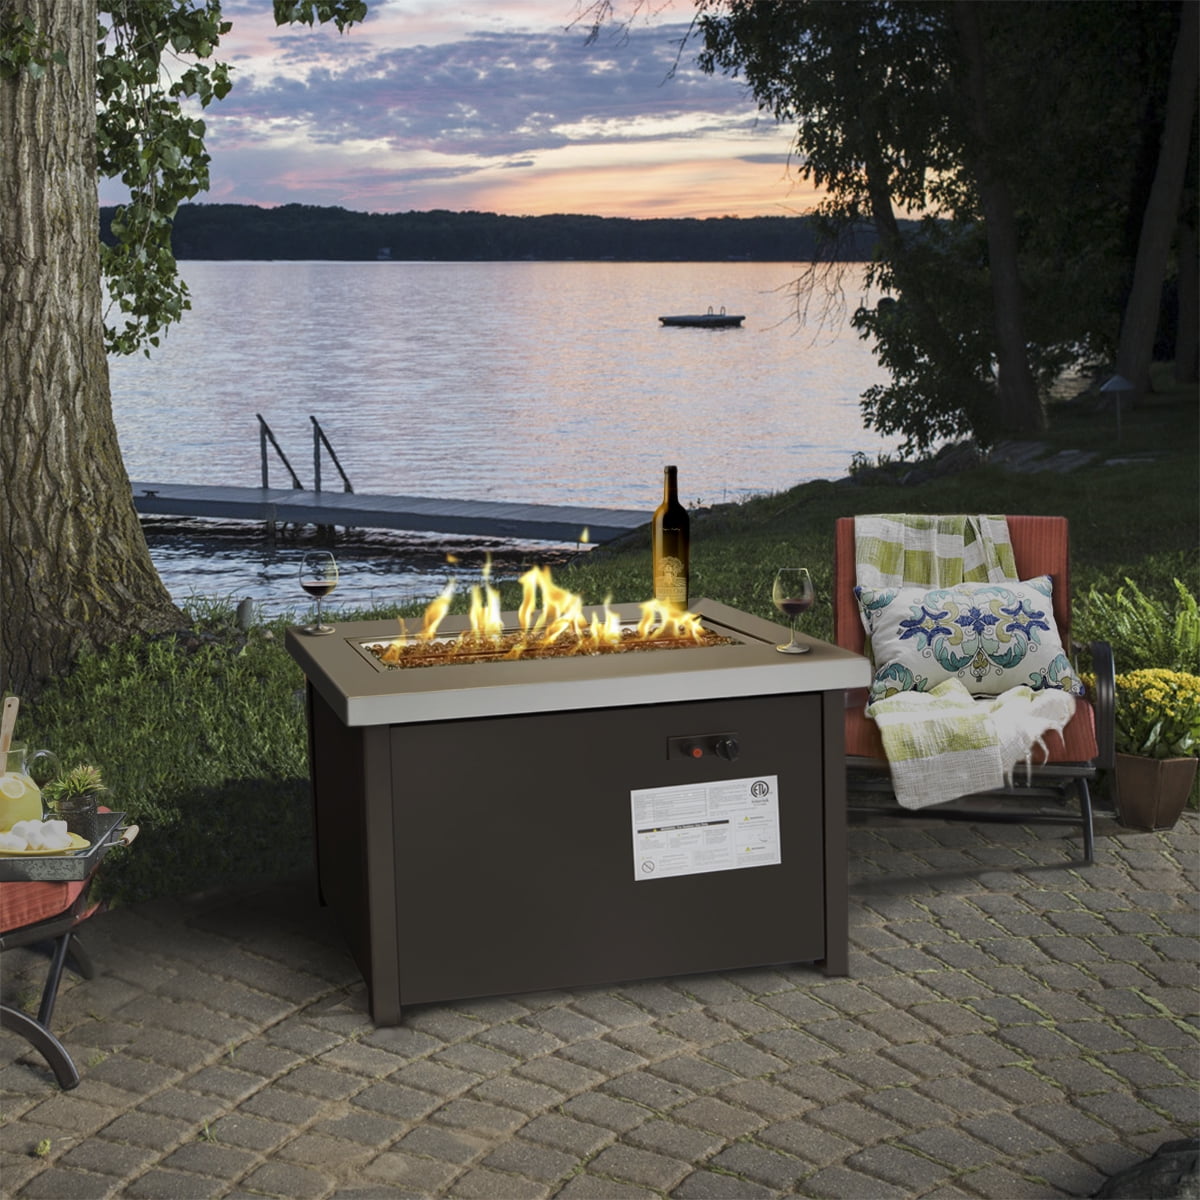 Barton Outdoor Propane Gas Fire Pit, Propane Fire Pit Instructions